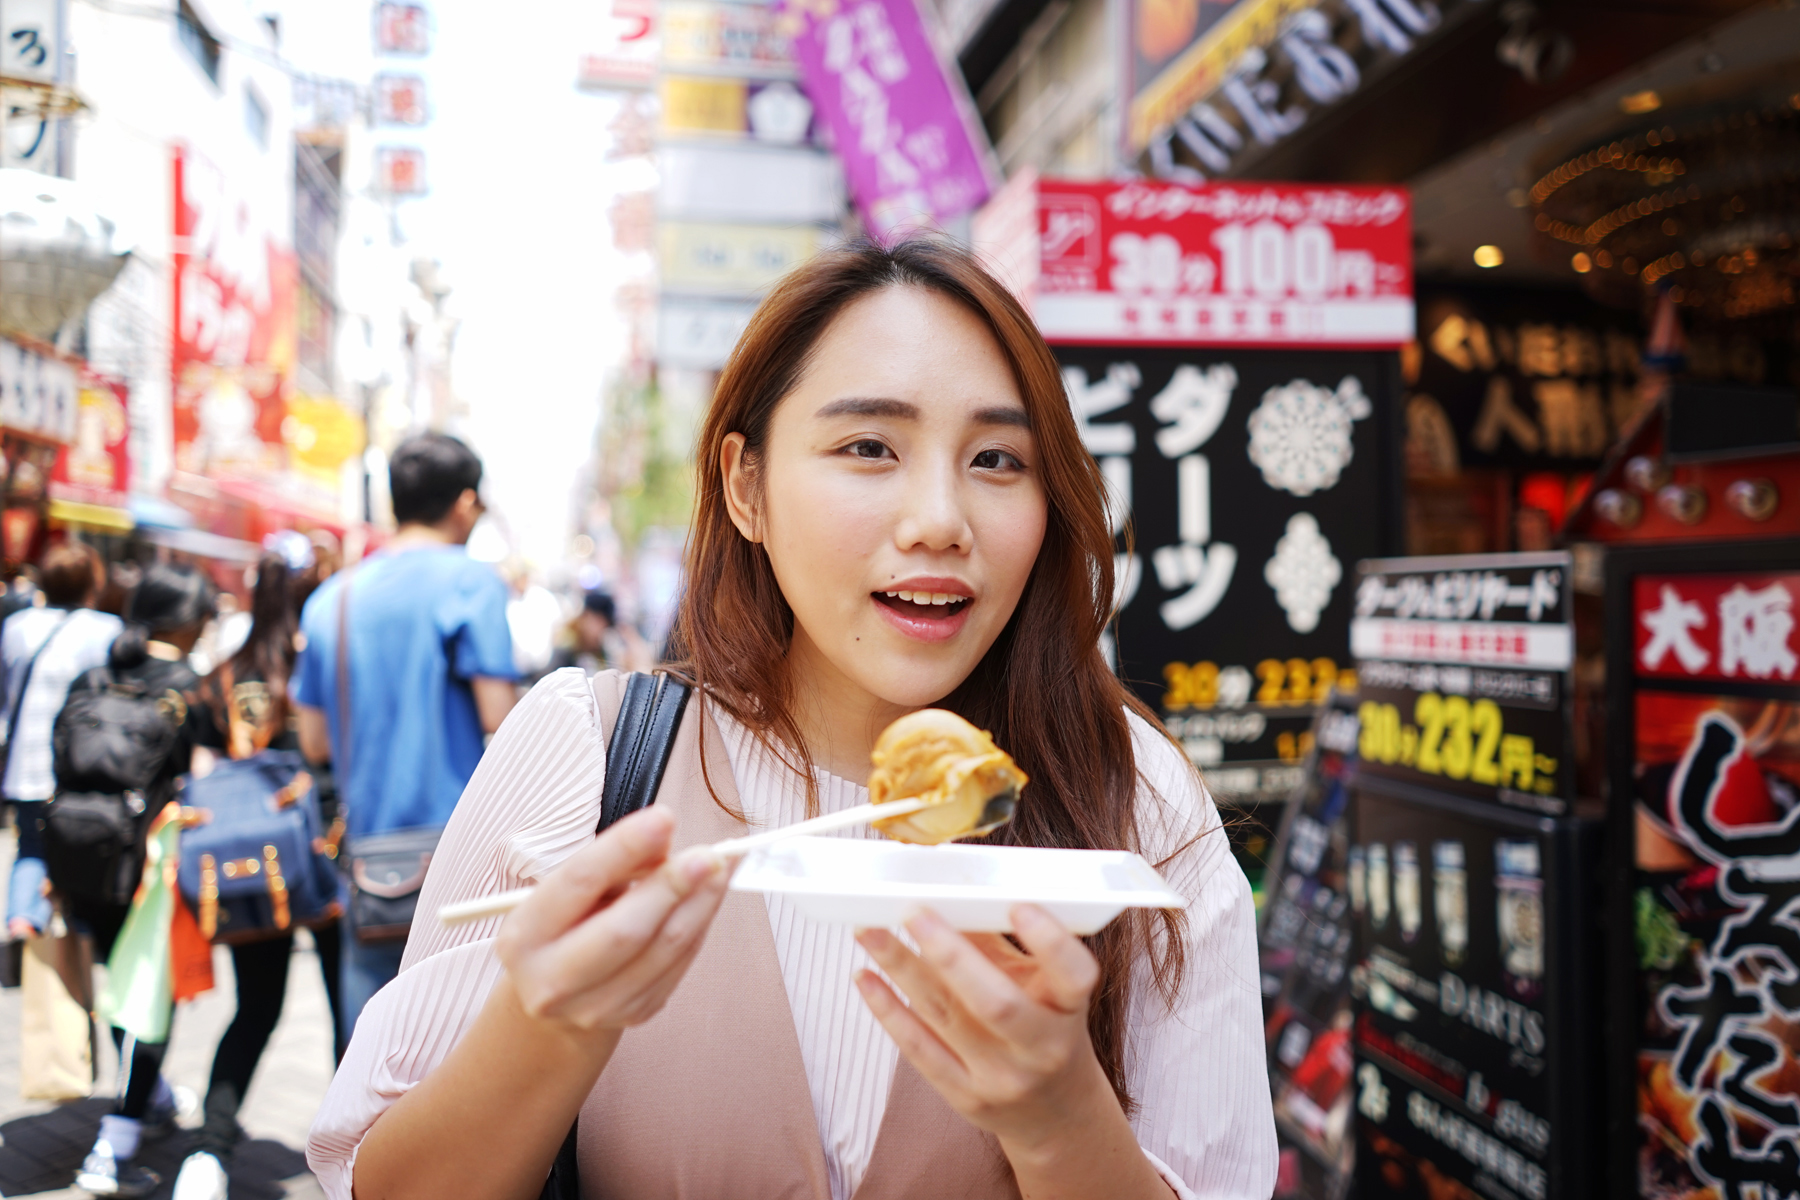 Things To Eat in Dotonbori: 4 Great Foodie Finds in Osaka